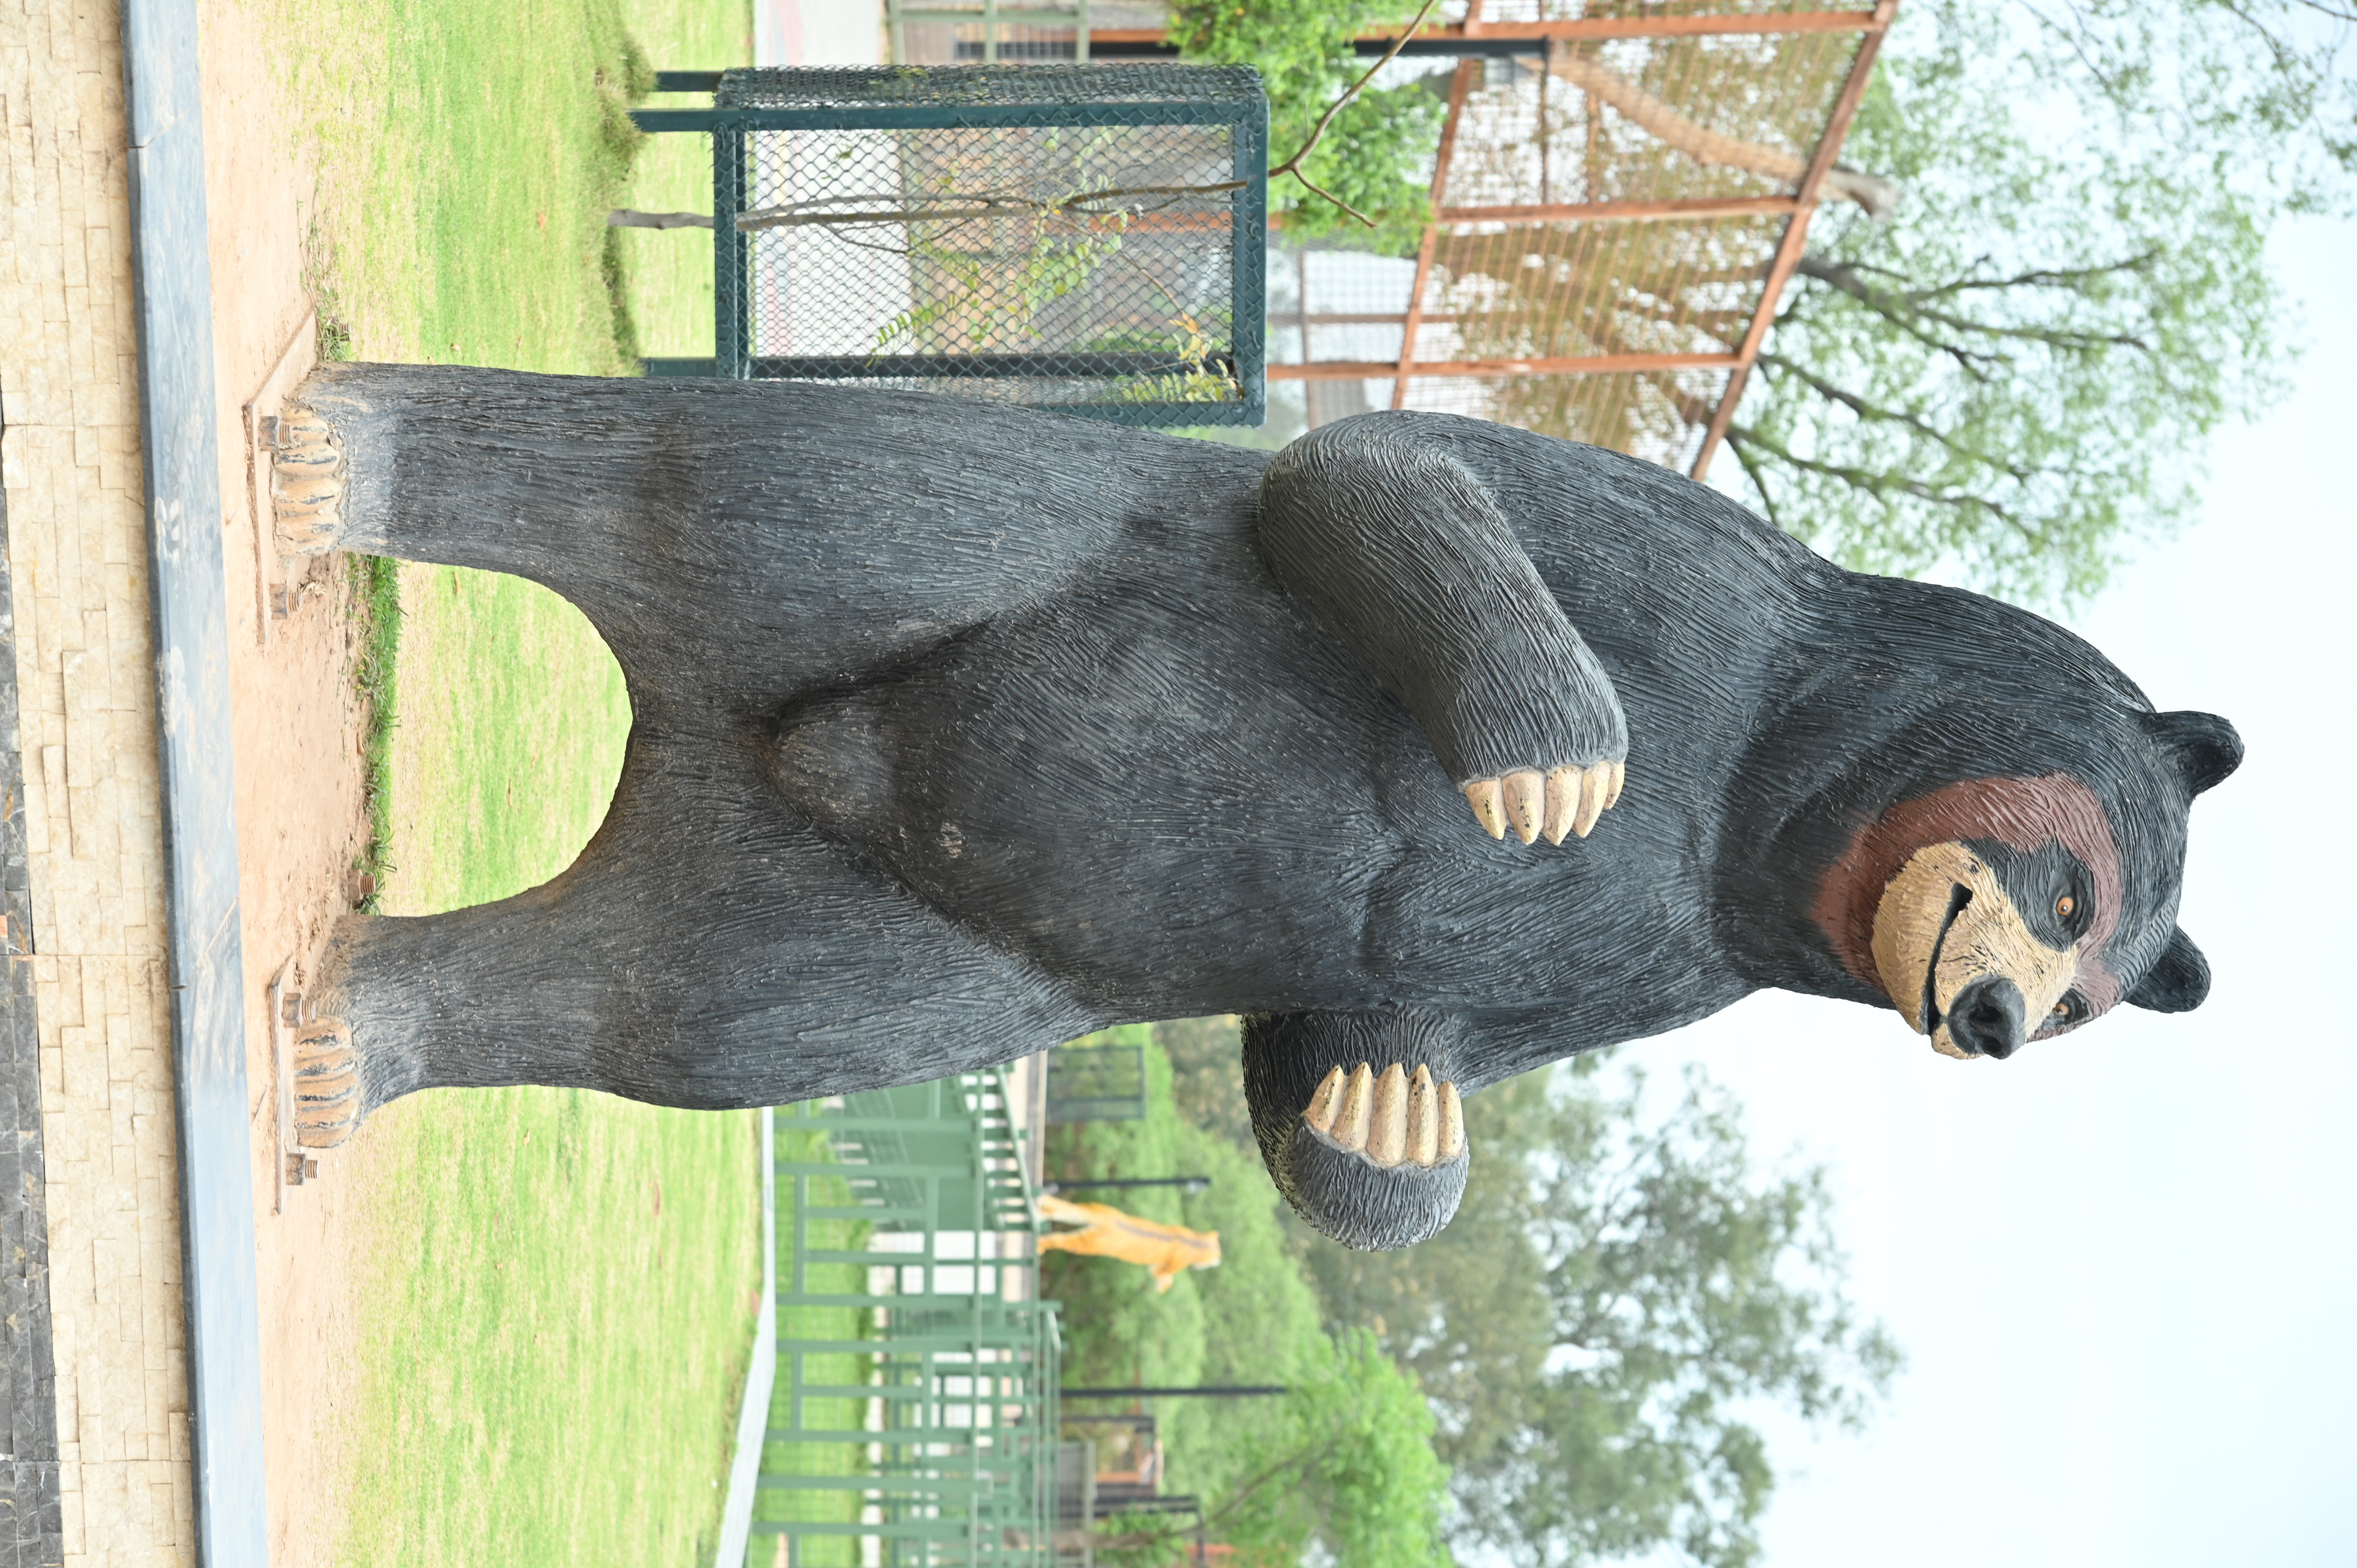 The 3D statue of a standing black bear